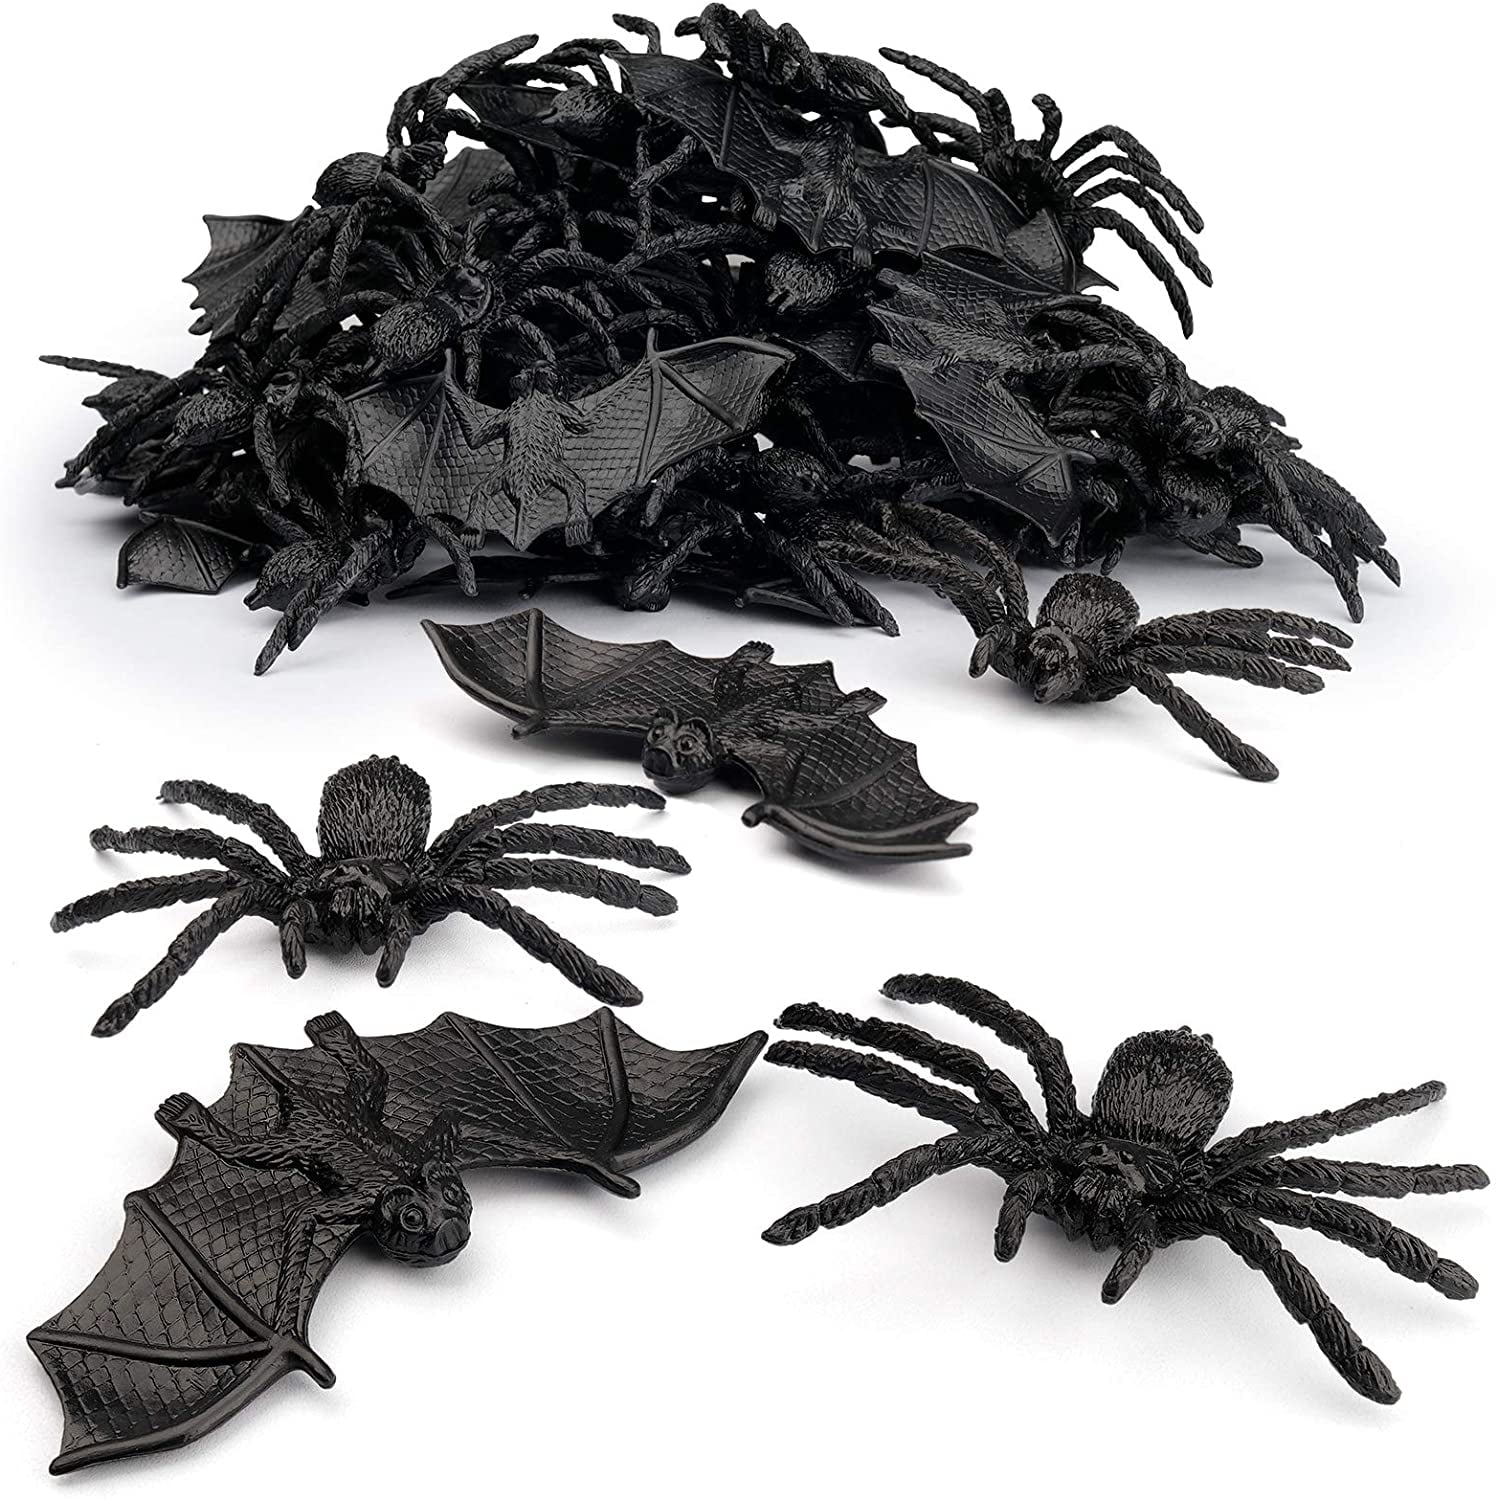 12 Plastic Toy Gift Favours Spider Figures Party Bags Halloween Decorations 